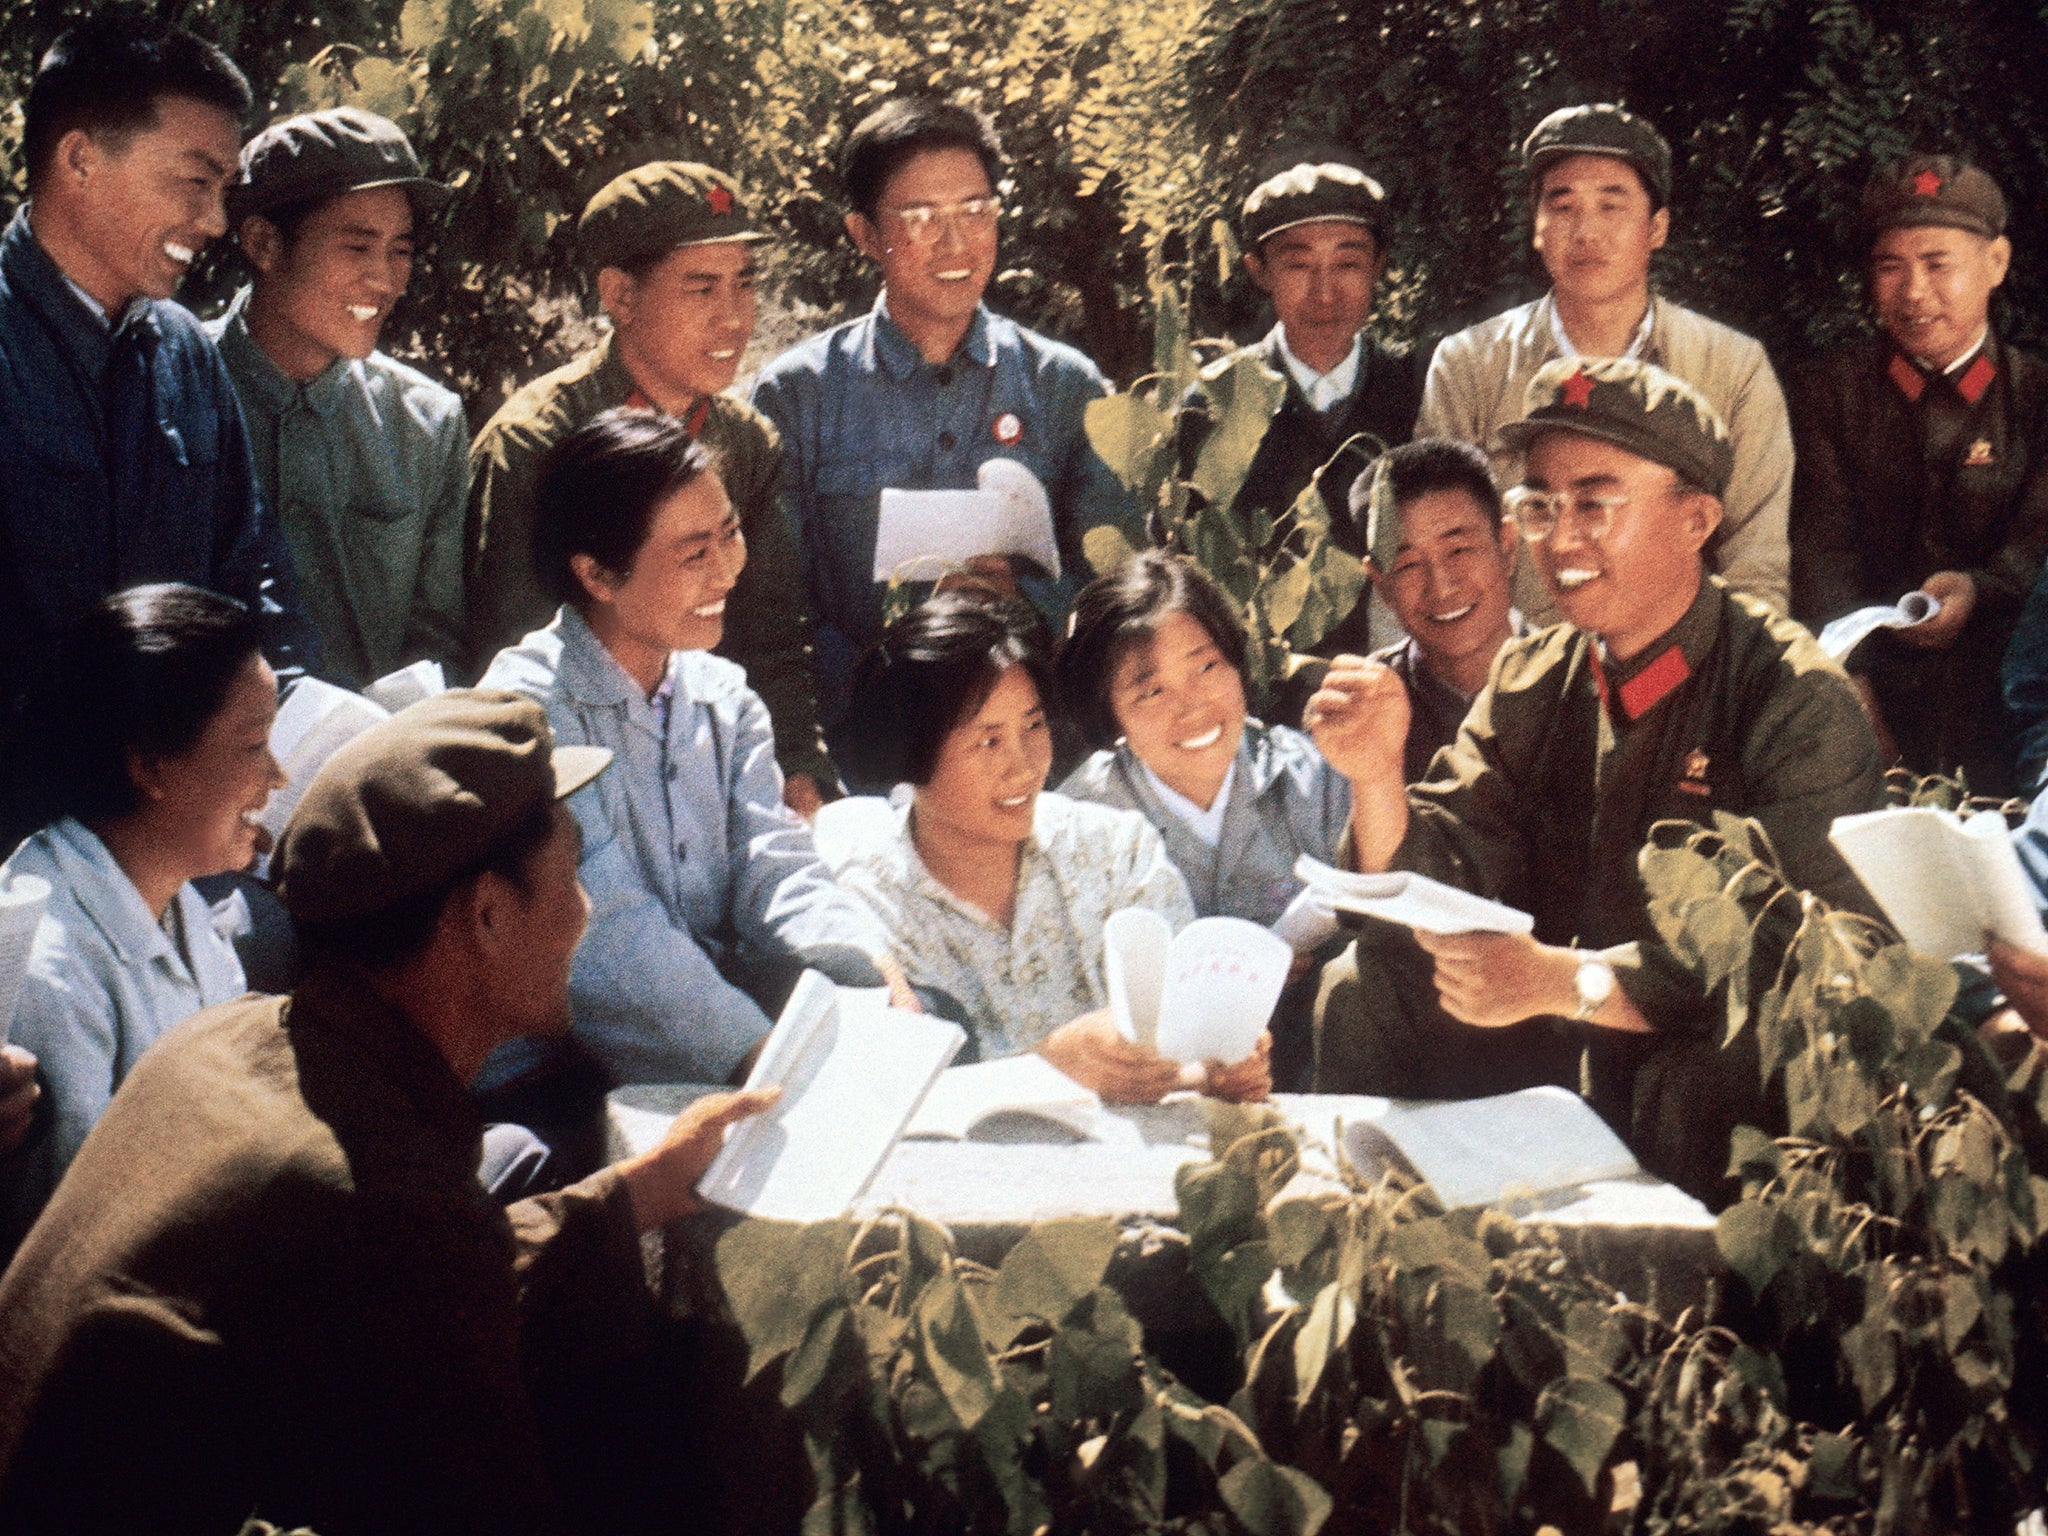 Chinese youth and red guards study copies of Mao’s ‘Little Red Book’ in a picture released in 1971 (Getty)